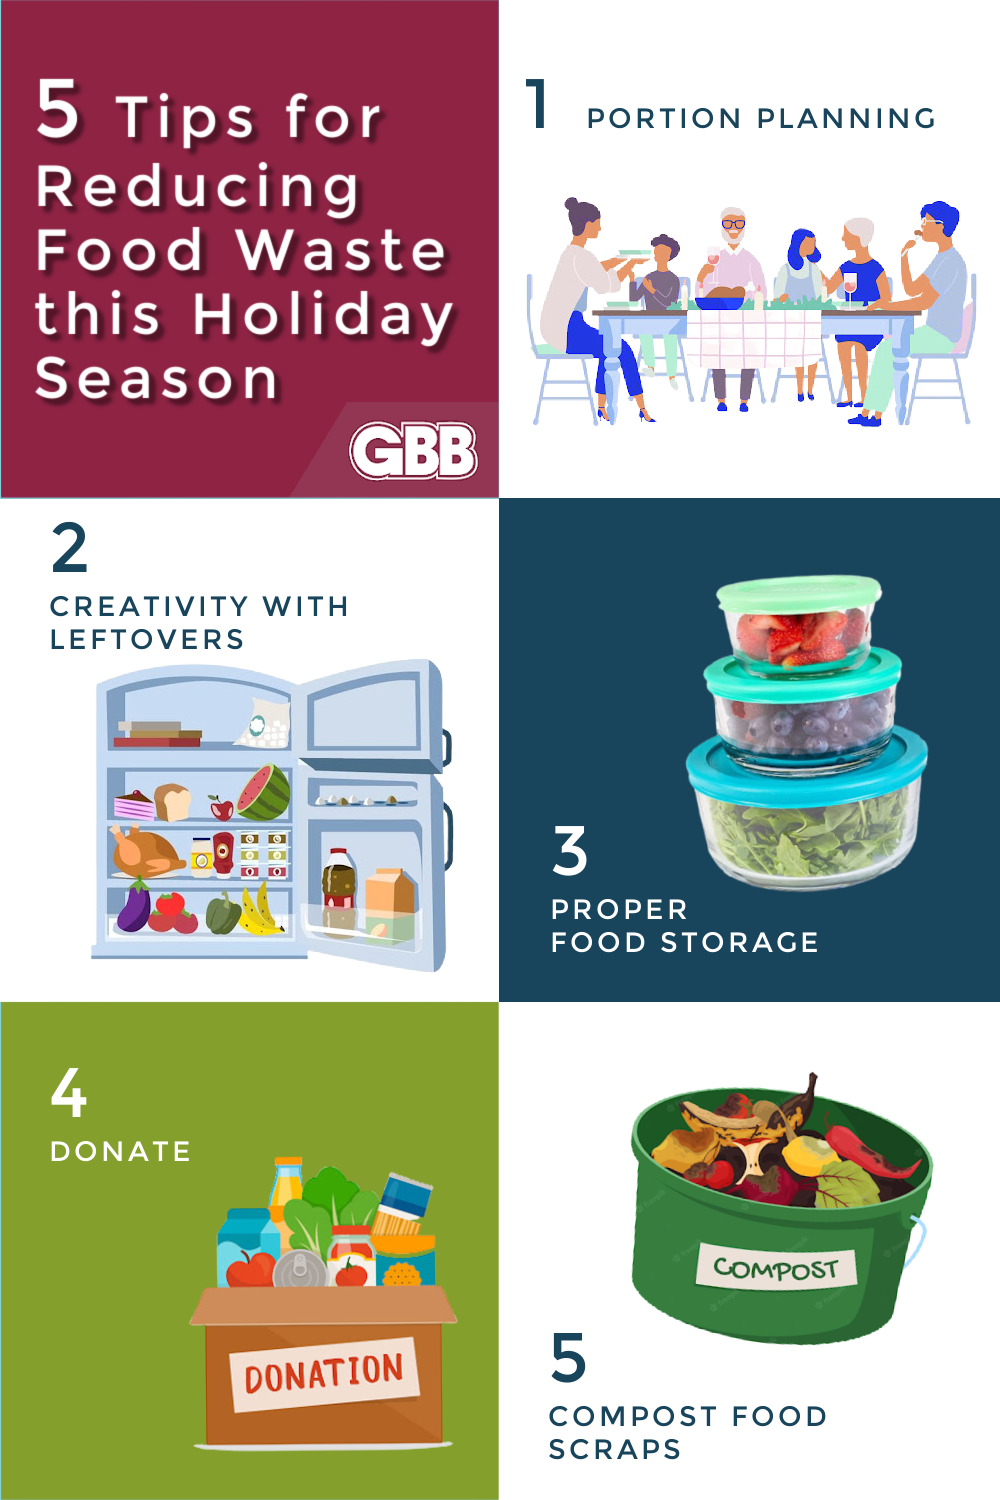 5 Tips to Reduce Food Waste During the Holiday Season